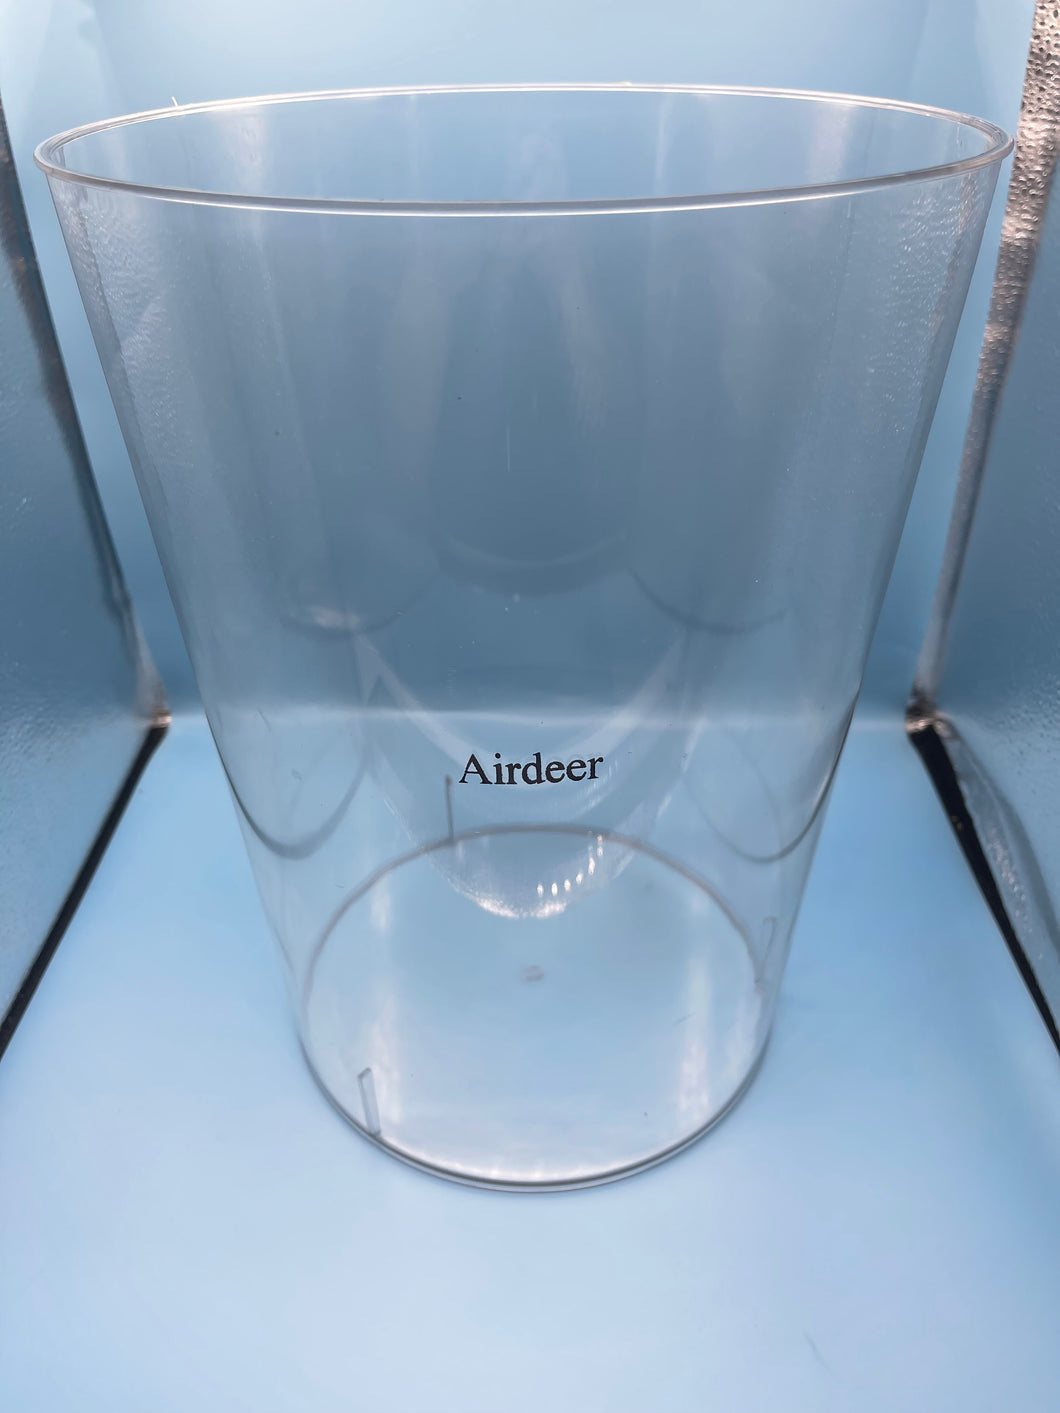 Airdeer Garbage pails,1 Pack Plastic Waste Basket, Clear Round Trash Can Small Wastebasket Garbage Container Bin for Bathroom, Bedroom, Kitchen, Home, Office.